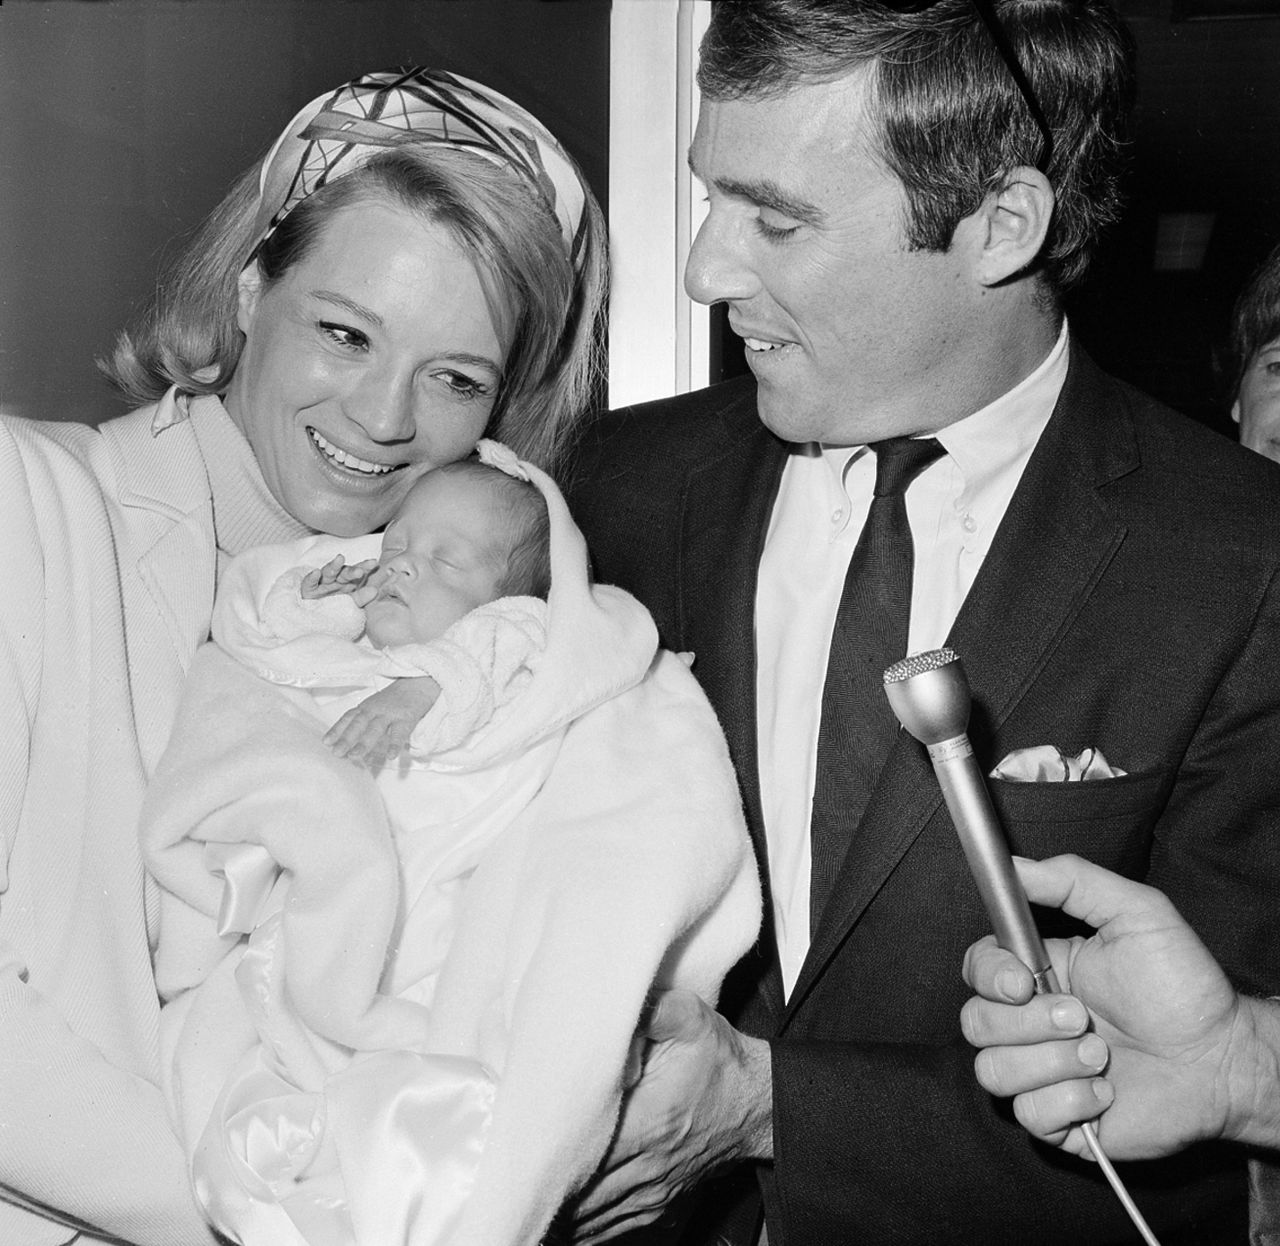 Bacharach and Dickinson take home their baby daughter Nikki in 1966.